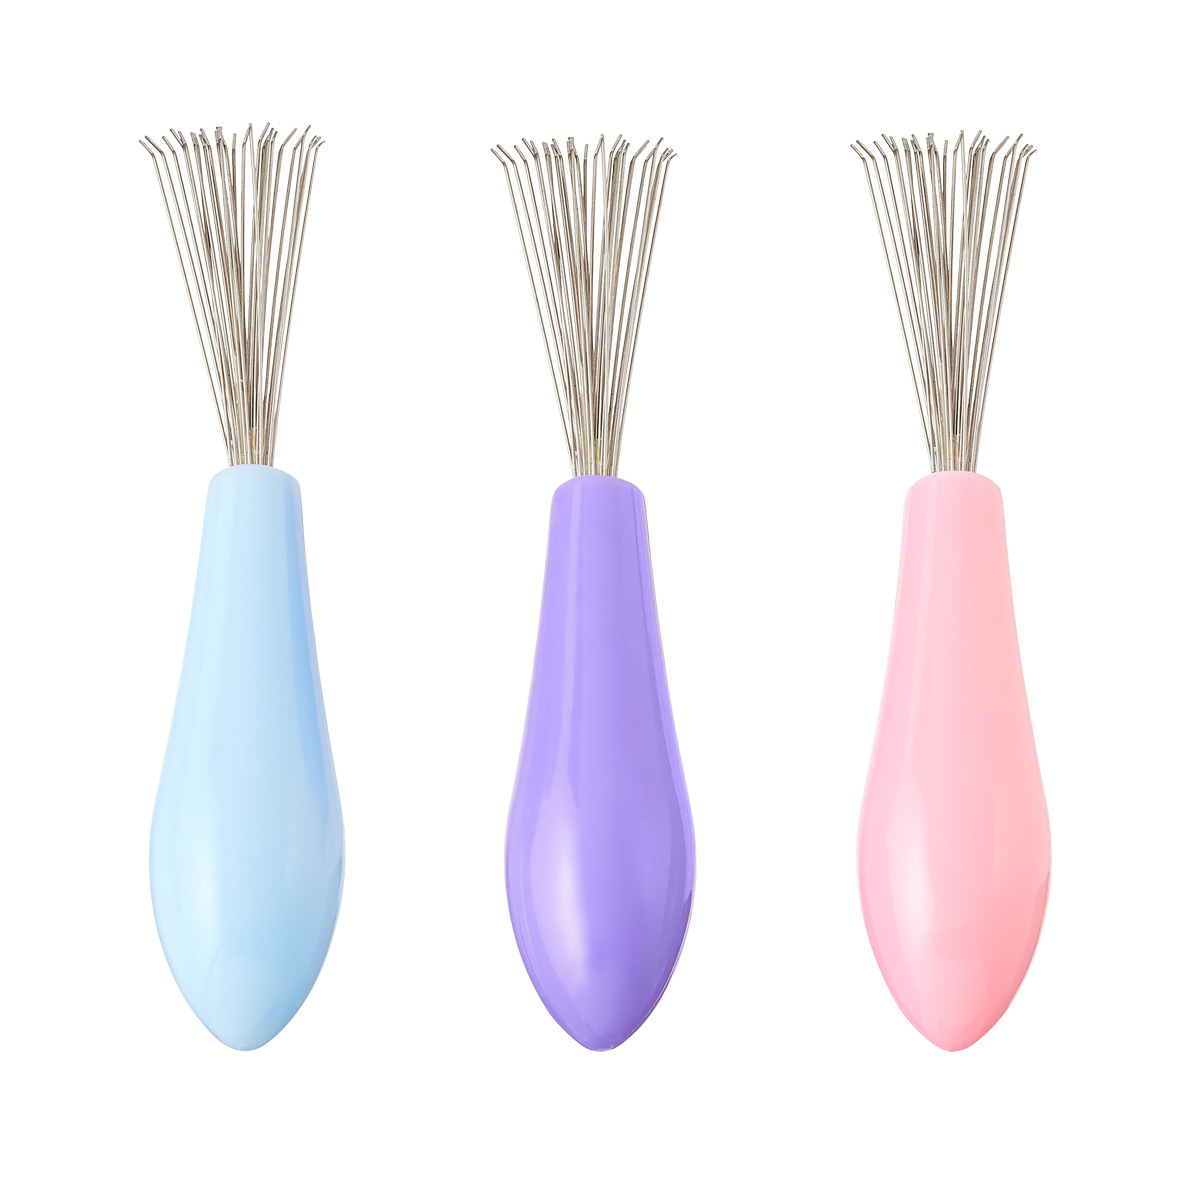 https://www.containerstore.com/catalogimages/438629/10086754_Hairbrush_Cleaner_Assorted_.jpg